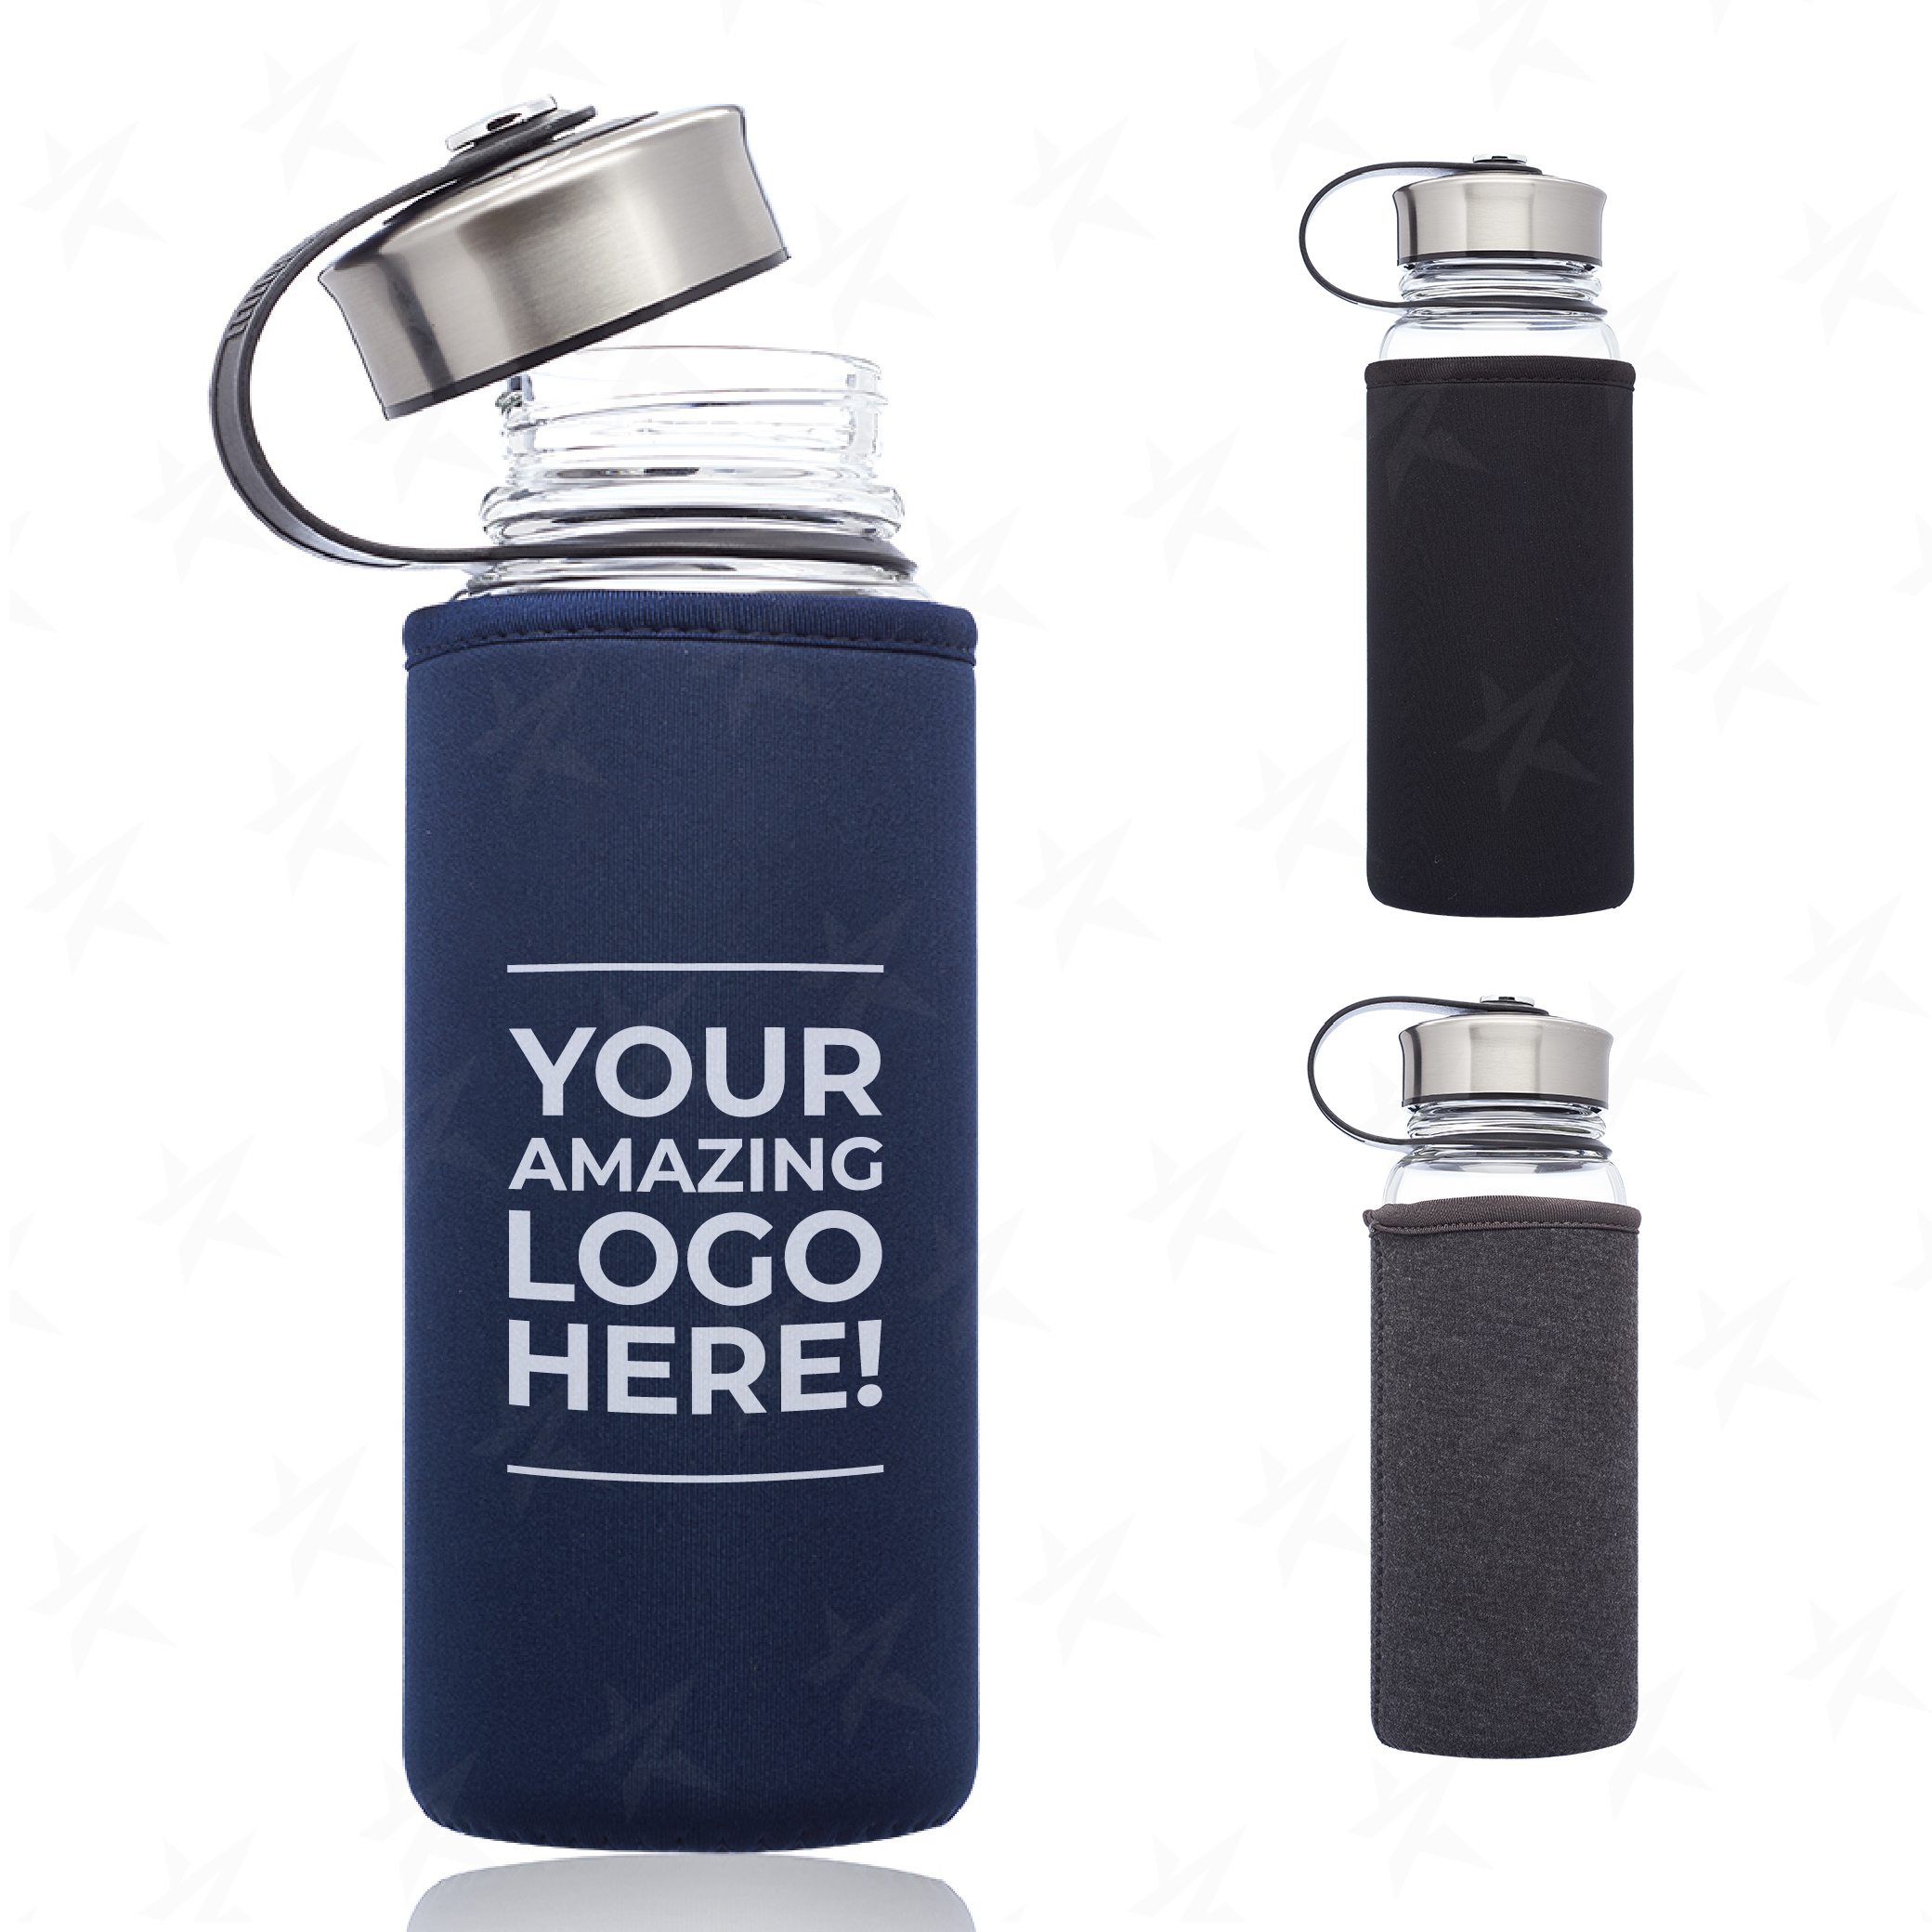 promo-kangaroo-glass-bottles-with-pouch